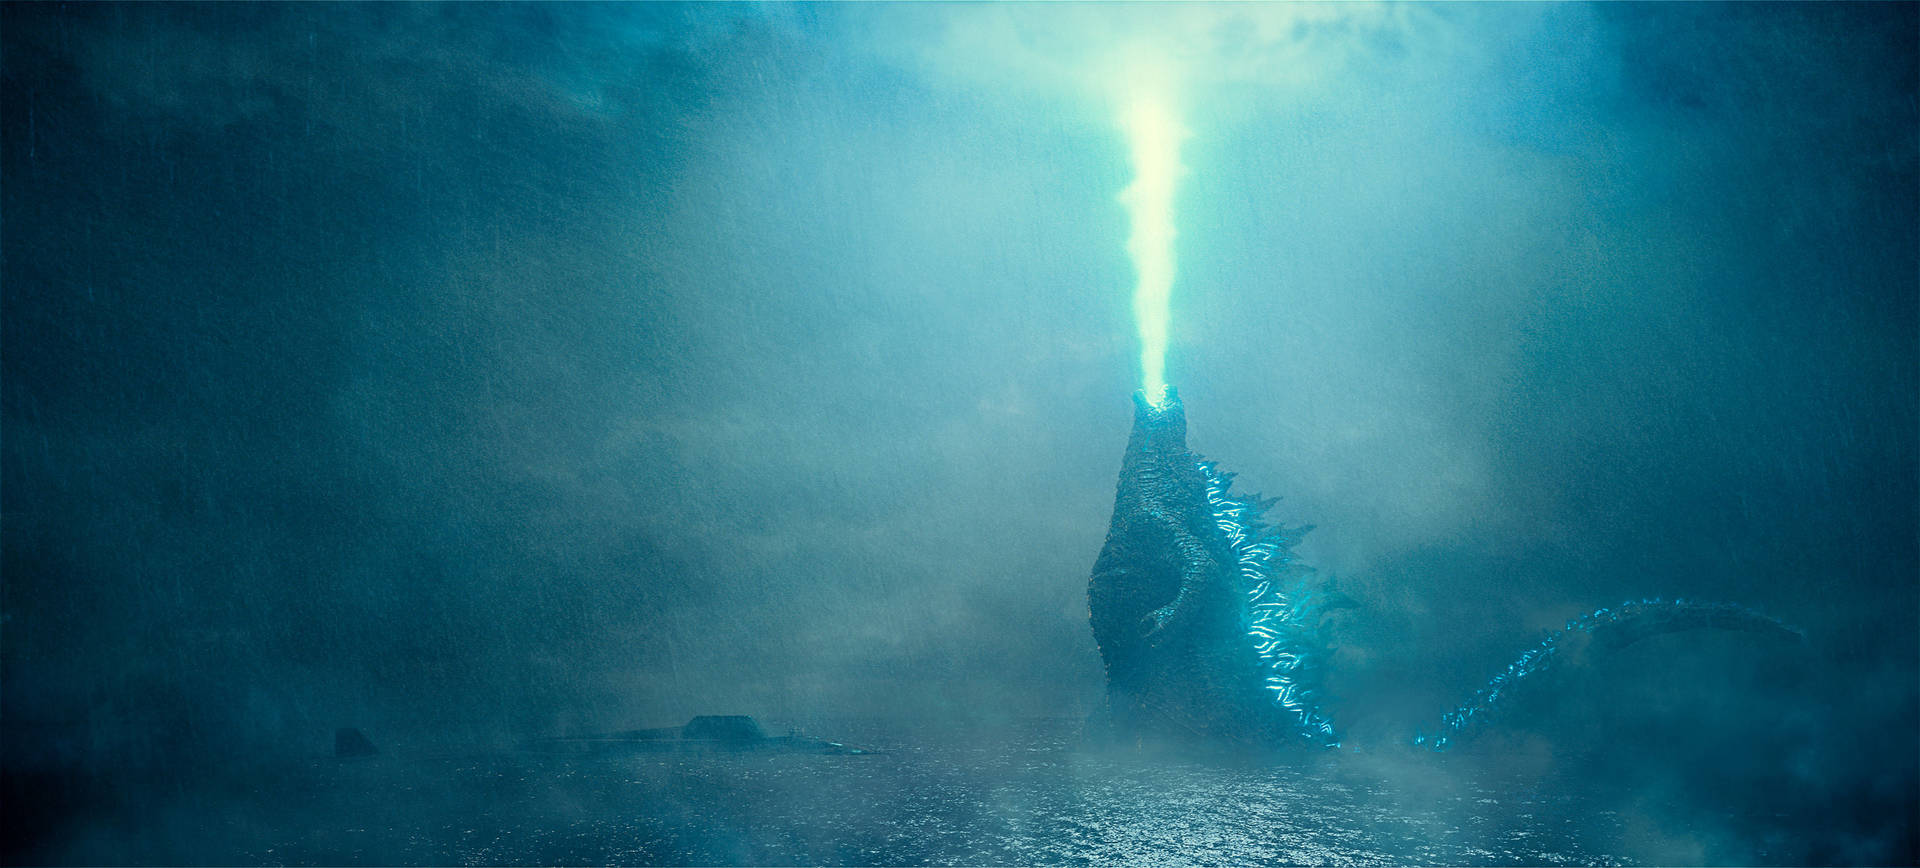 Ultra Hd Aesthetic Godzilla King Of The Monsters Background